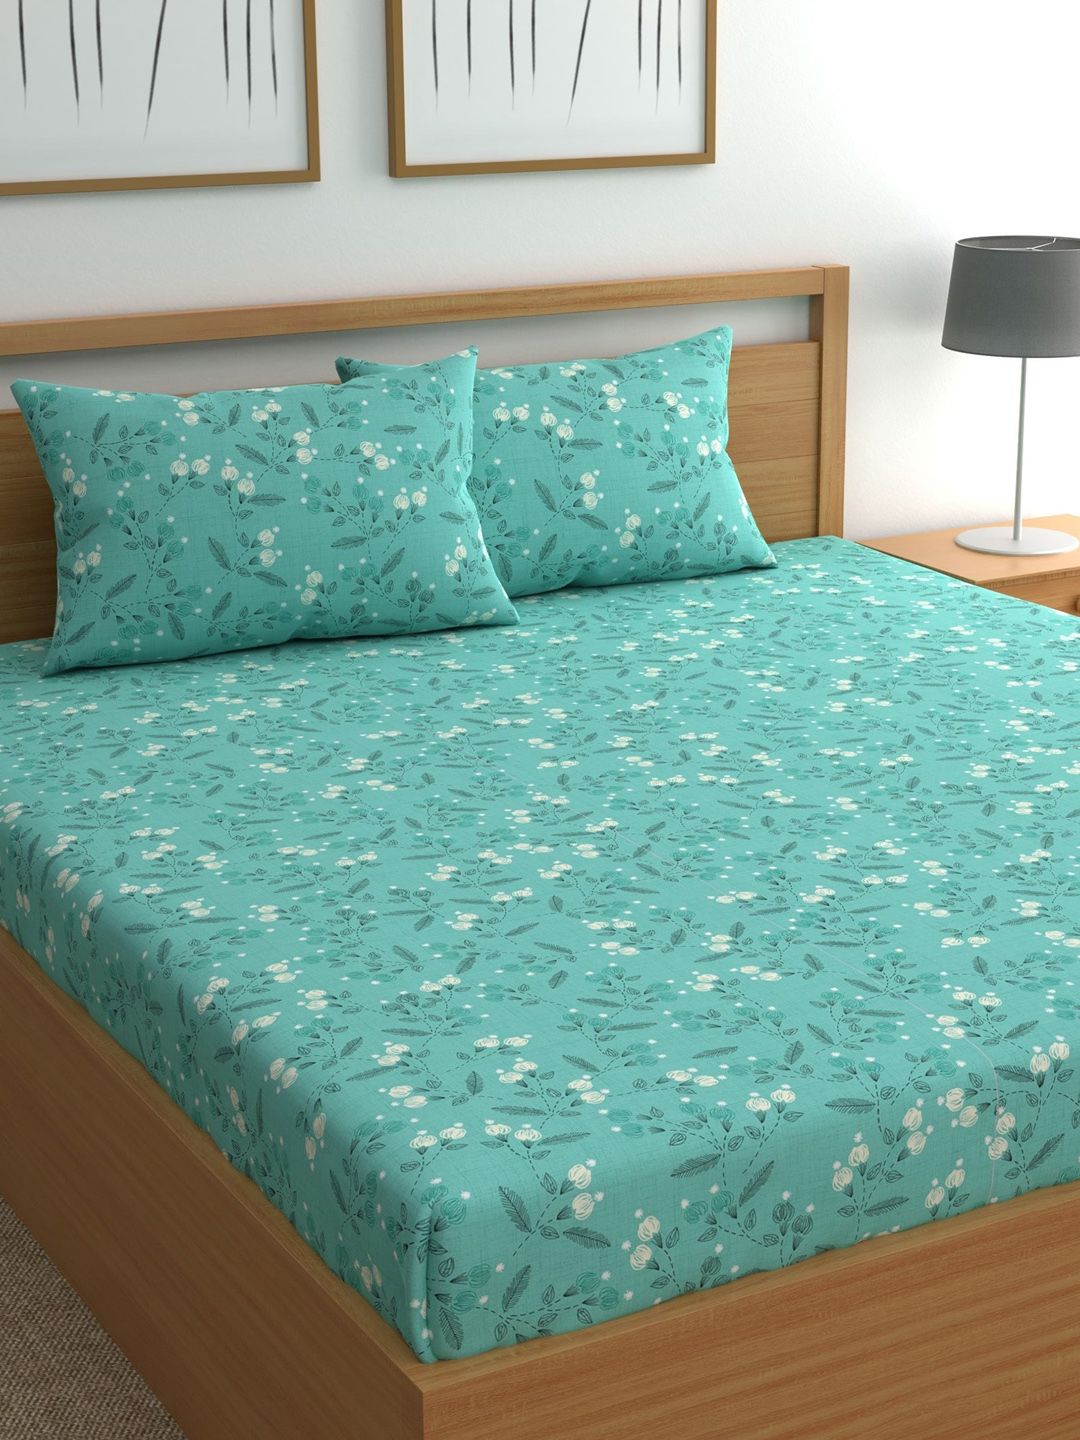 CHHAVI INDIA Sea Green & White Floral 210 TC Queen Bedsheet with 2 Pillow Covers Price in India